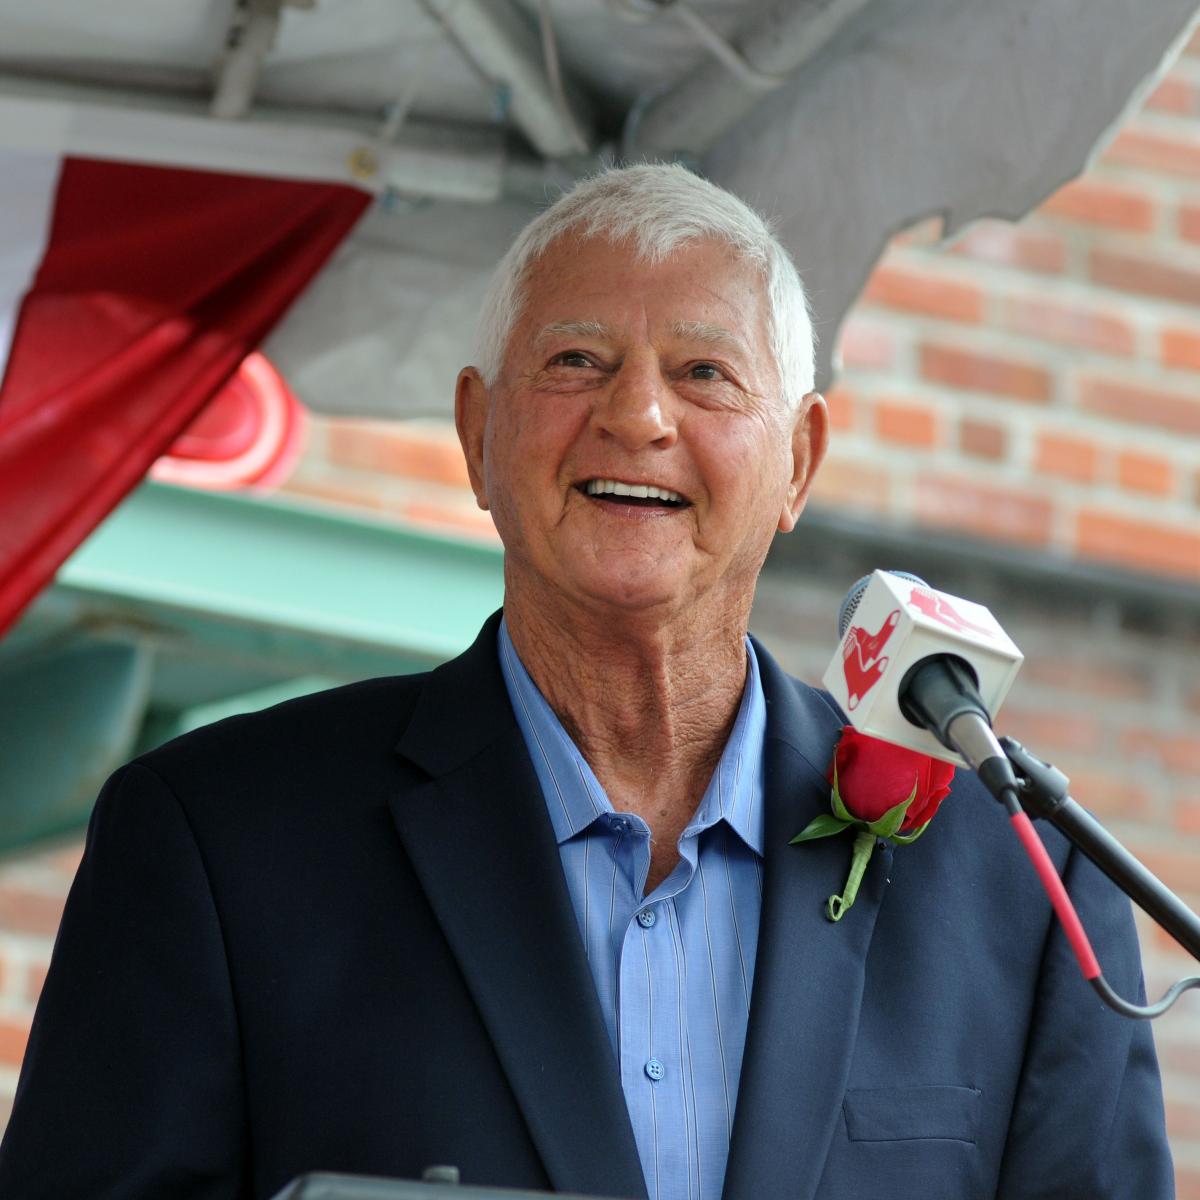 Three Things You Should Know About Carl Yastrzemski - Hal Phillips